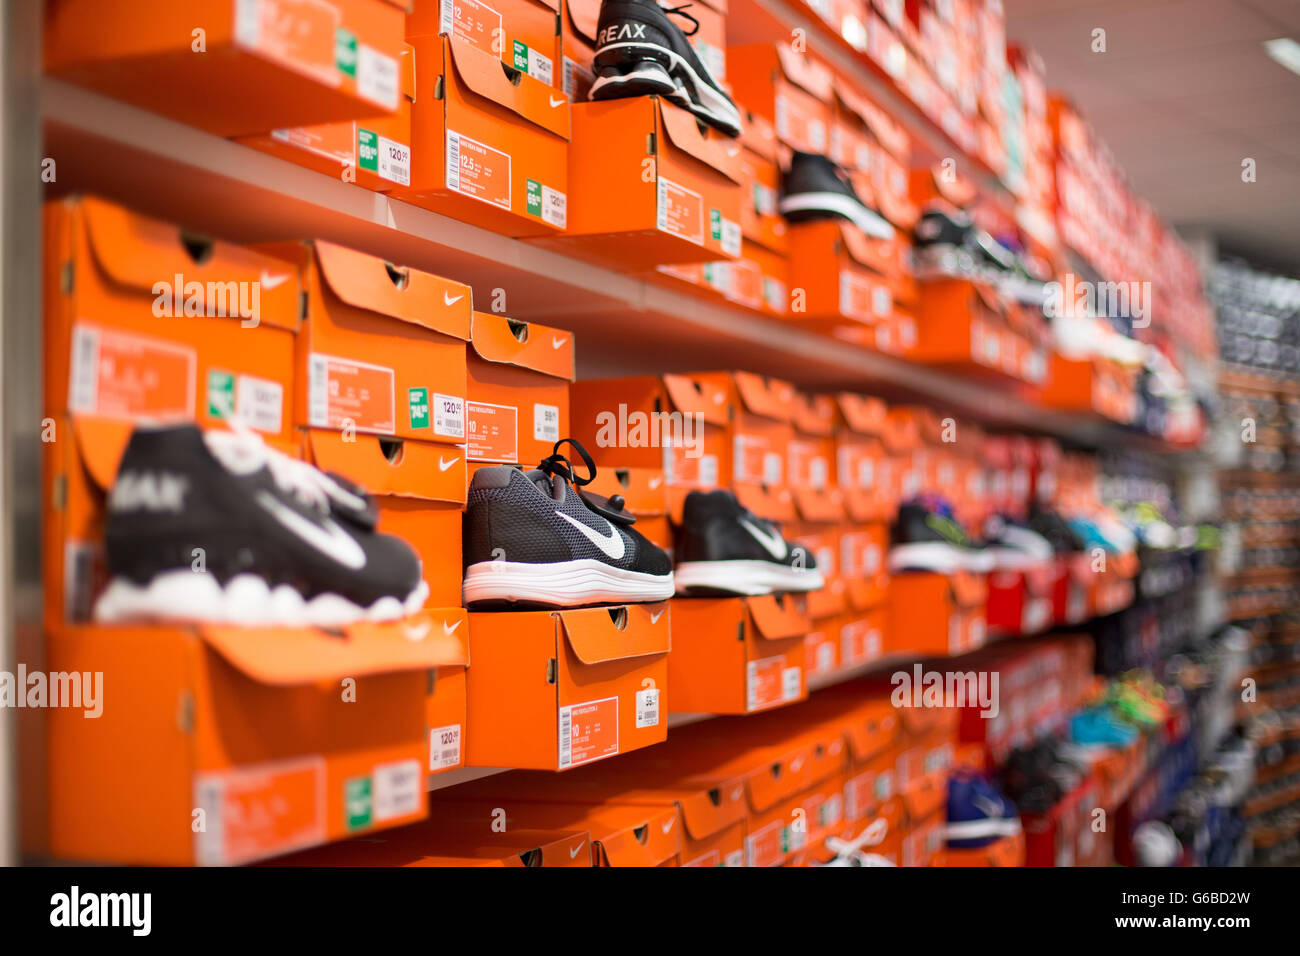 Page 3 - Shoes on sale High Resolution Stock Photography and Images - Alamy